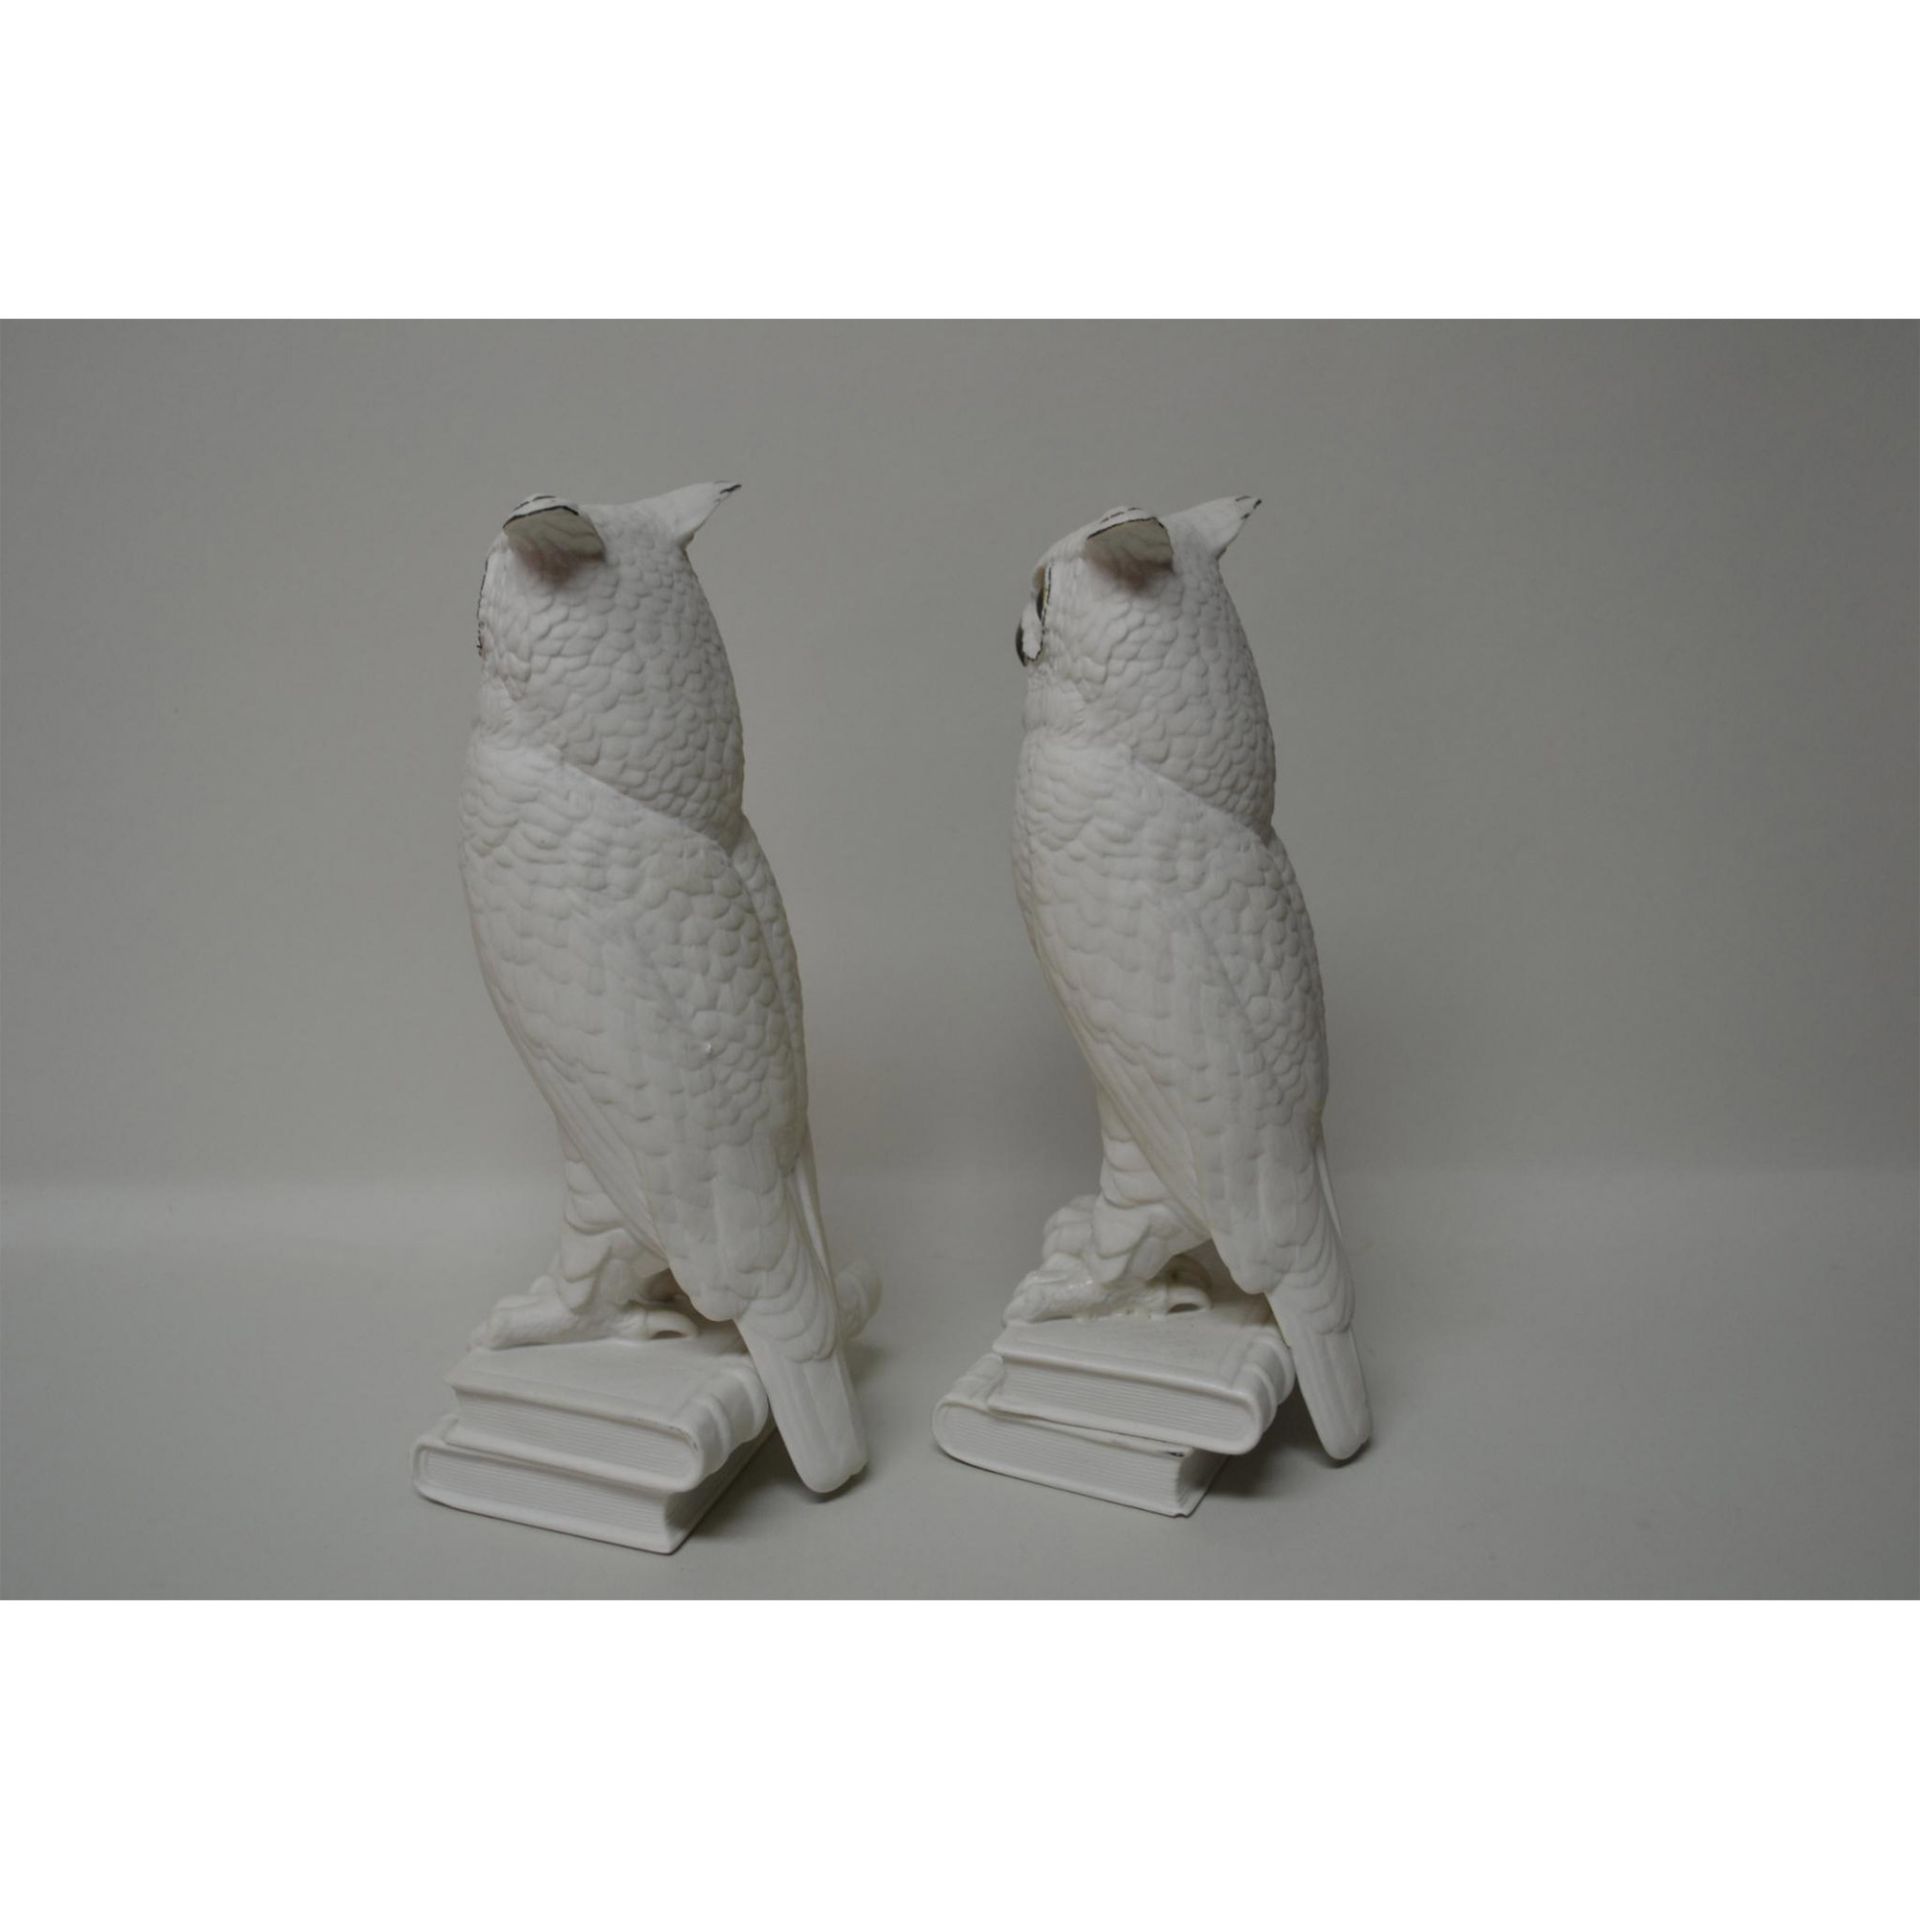 Boehm Porcelain Owl Bookends, Pair, Early, 1960 - Image 5 of 5